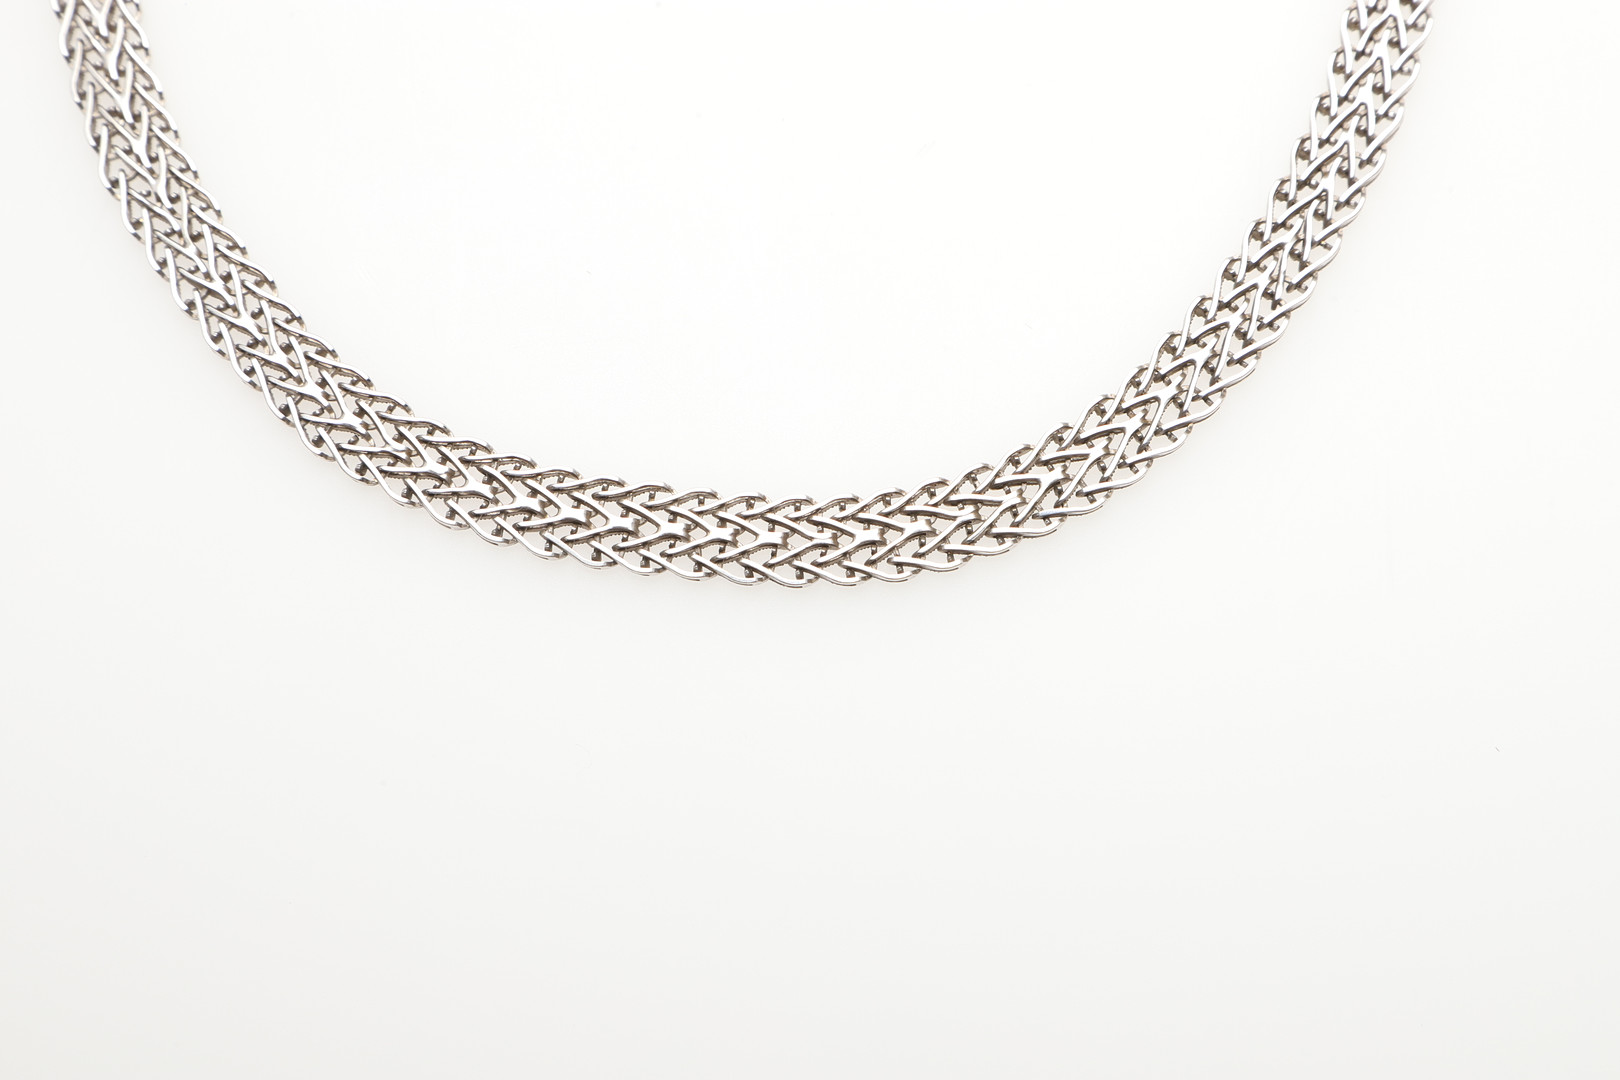 AN 18CT WHITE GOLD FANCY LINK NECKLACE. - Image 4 of 4